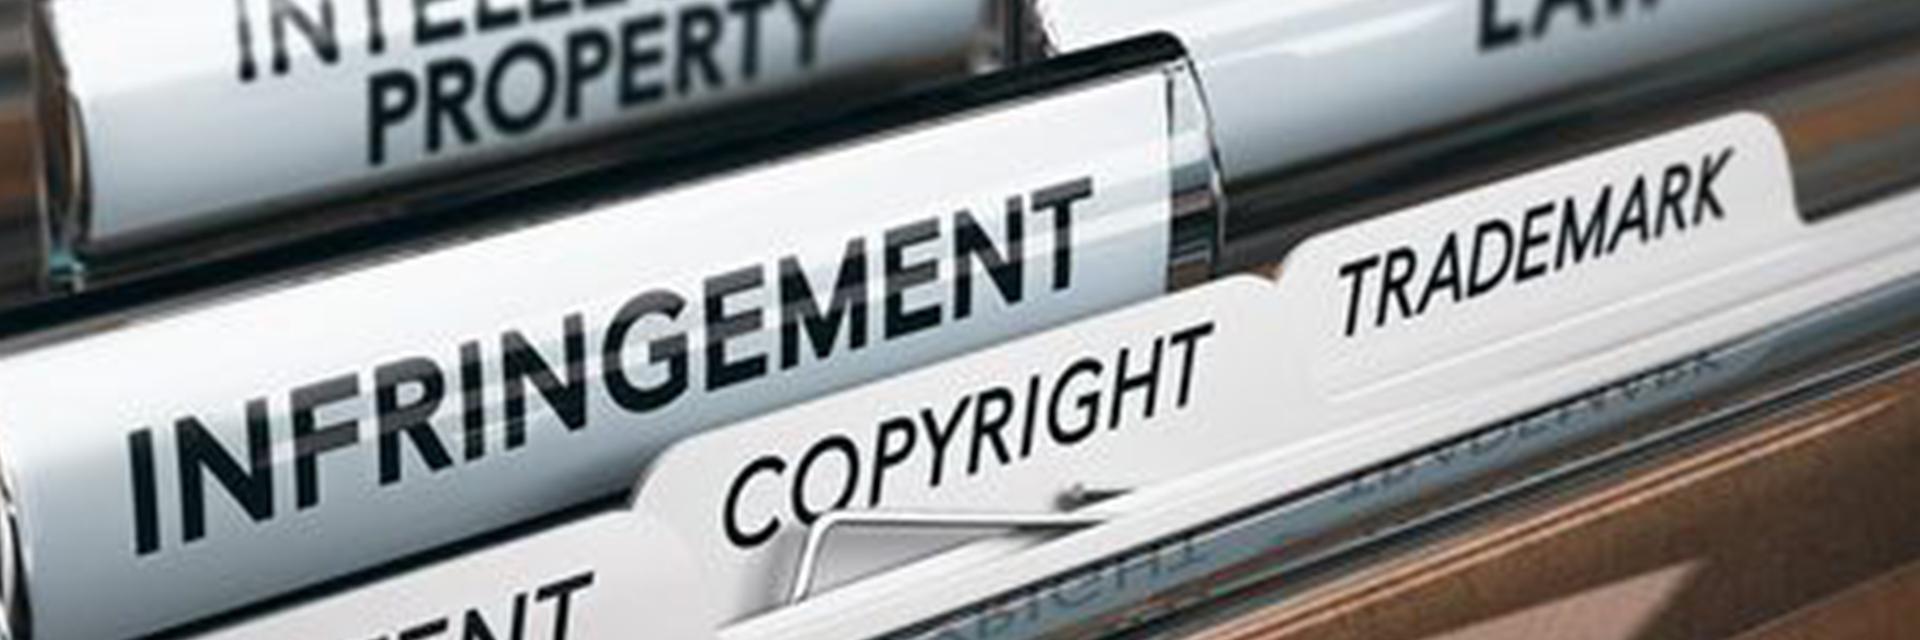 Copyright in the Digital Age&#58; 4 Eye&#45;Opening Cases